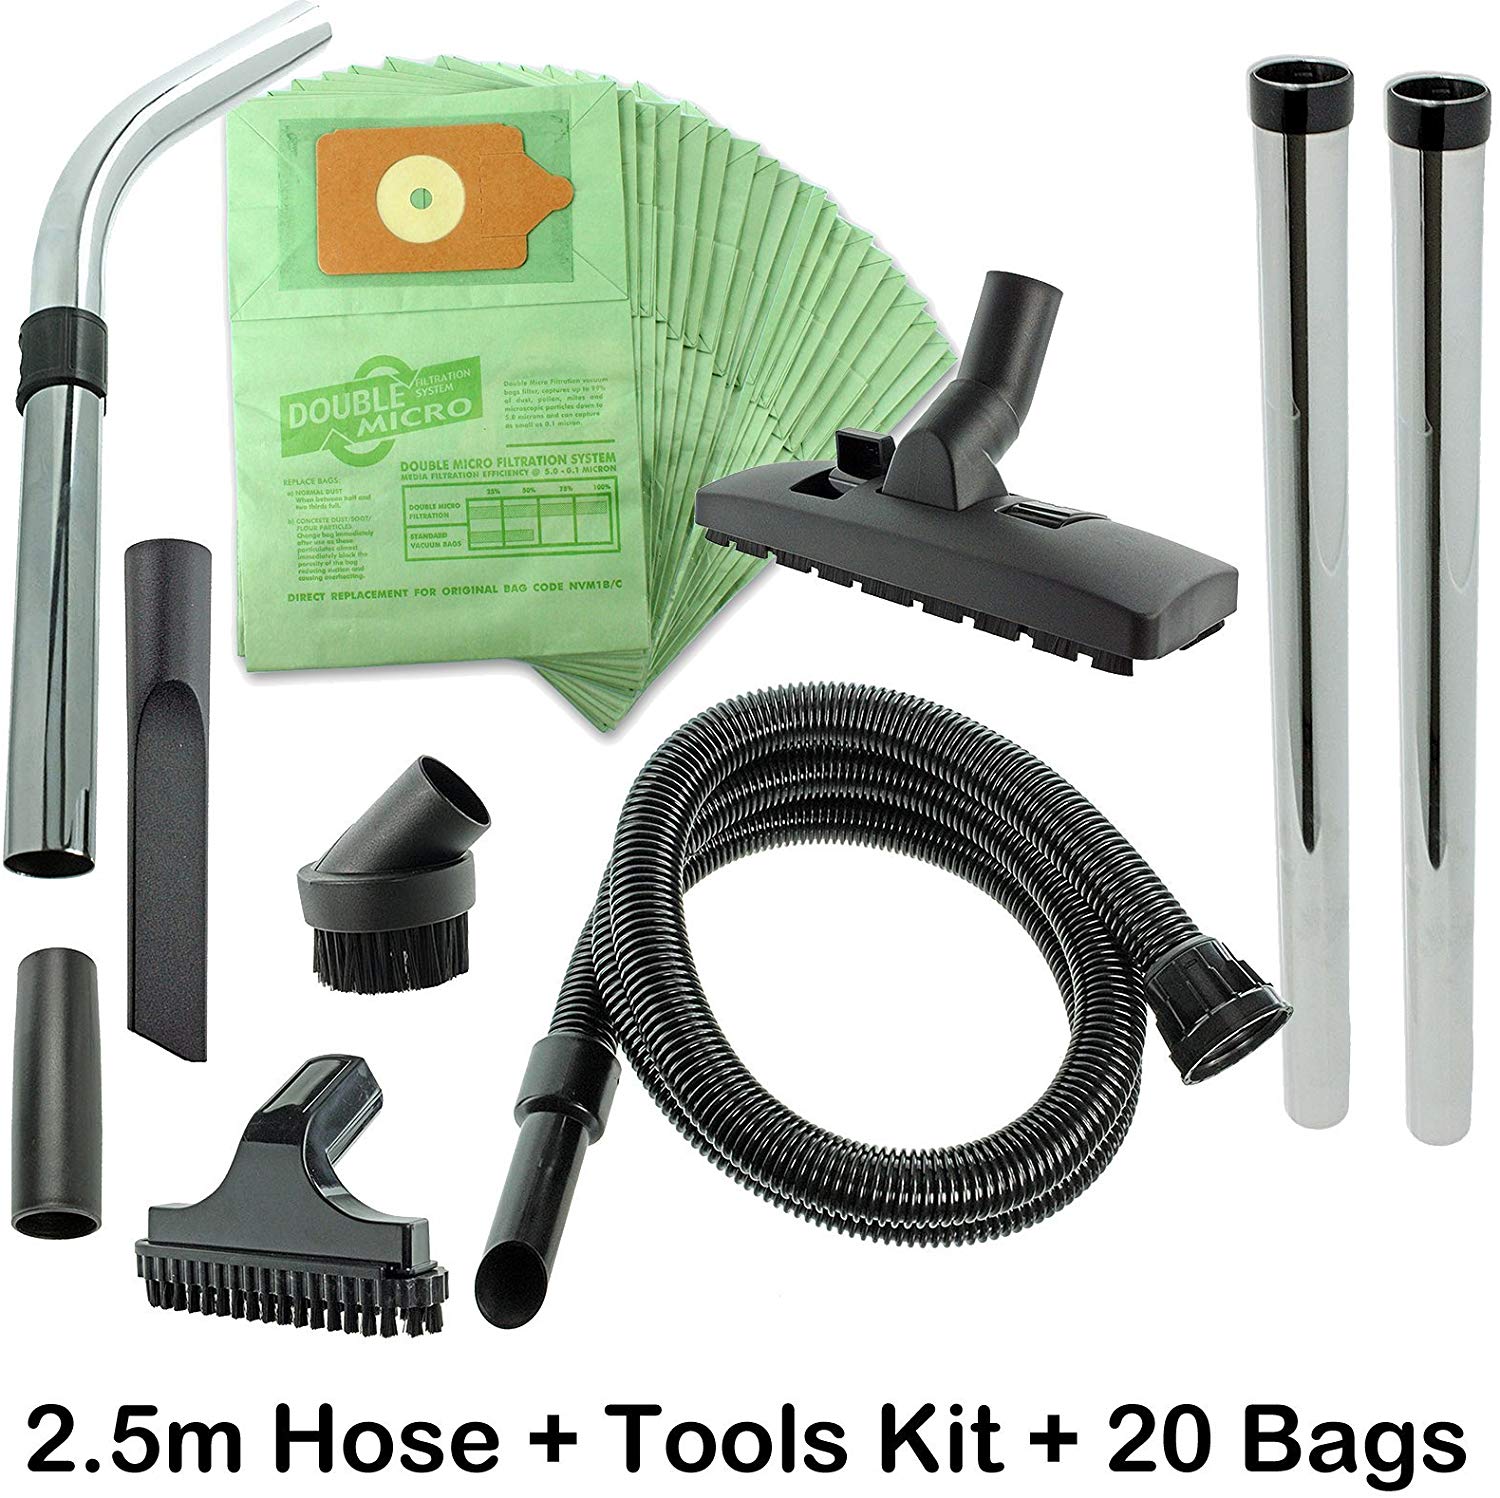 SPARES2GO Spare Parts Tool Kit for Numatic Henry Hetty James Vacuum Hoover + 20 Dust Bags